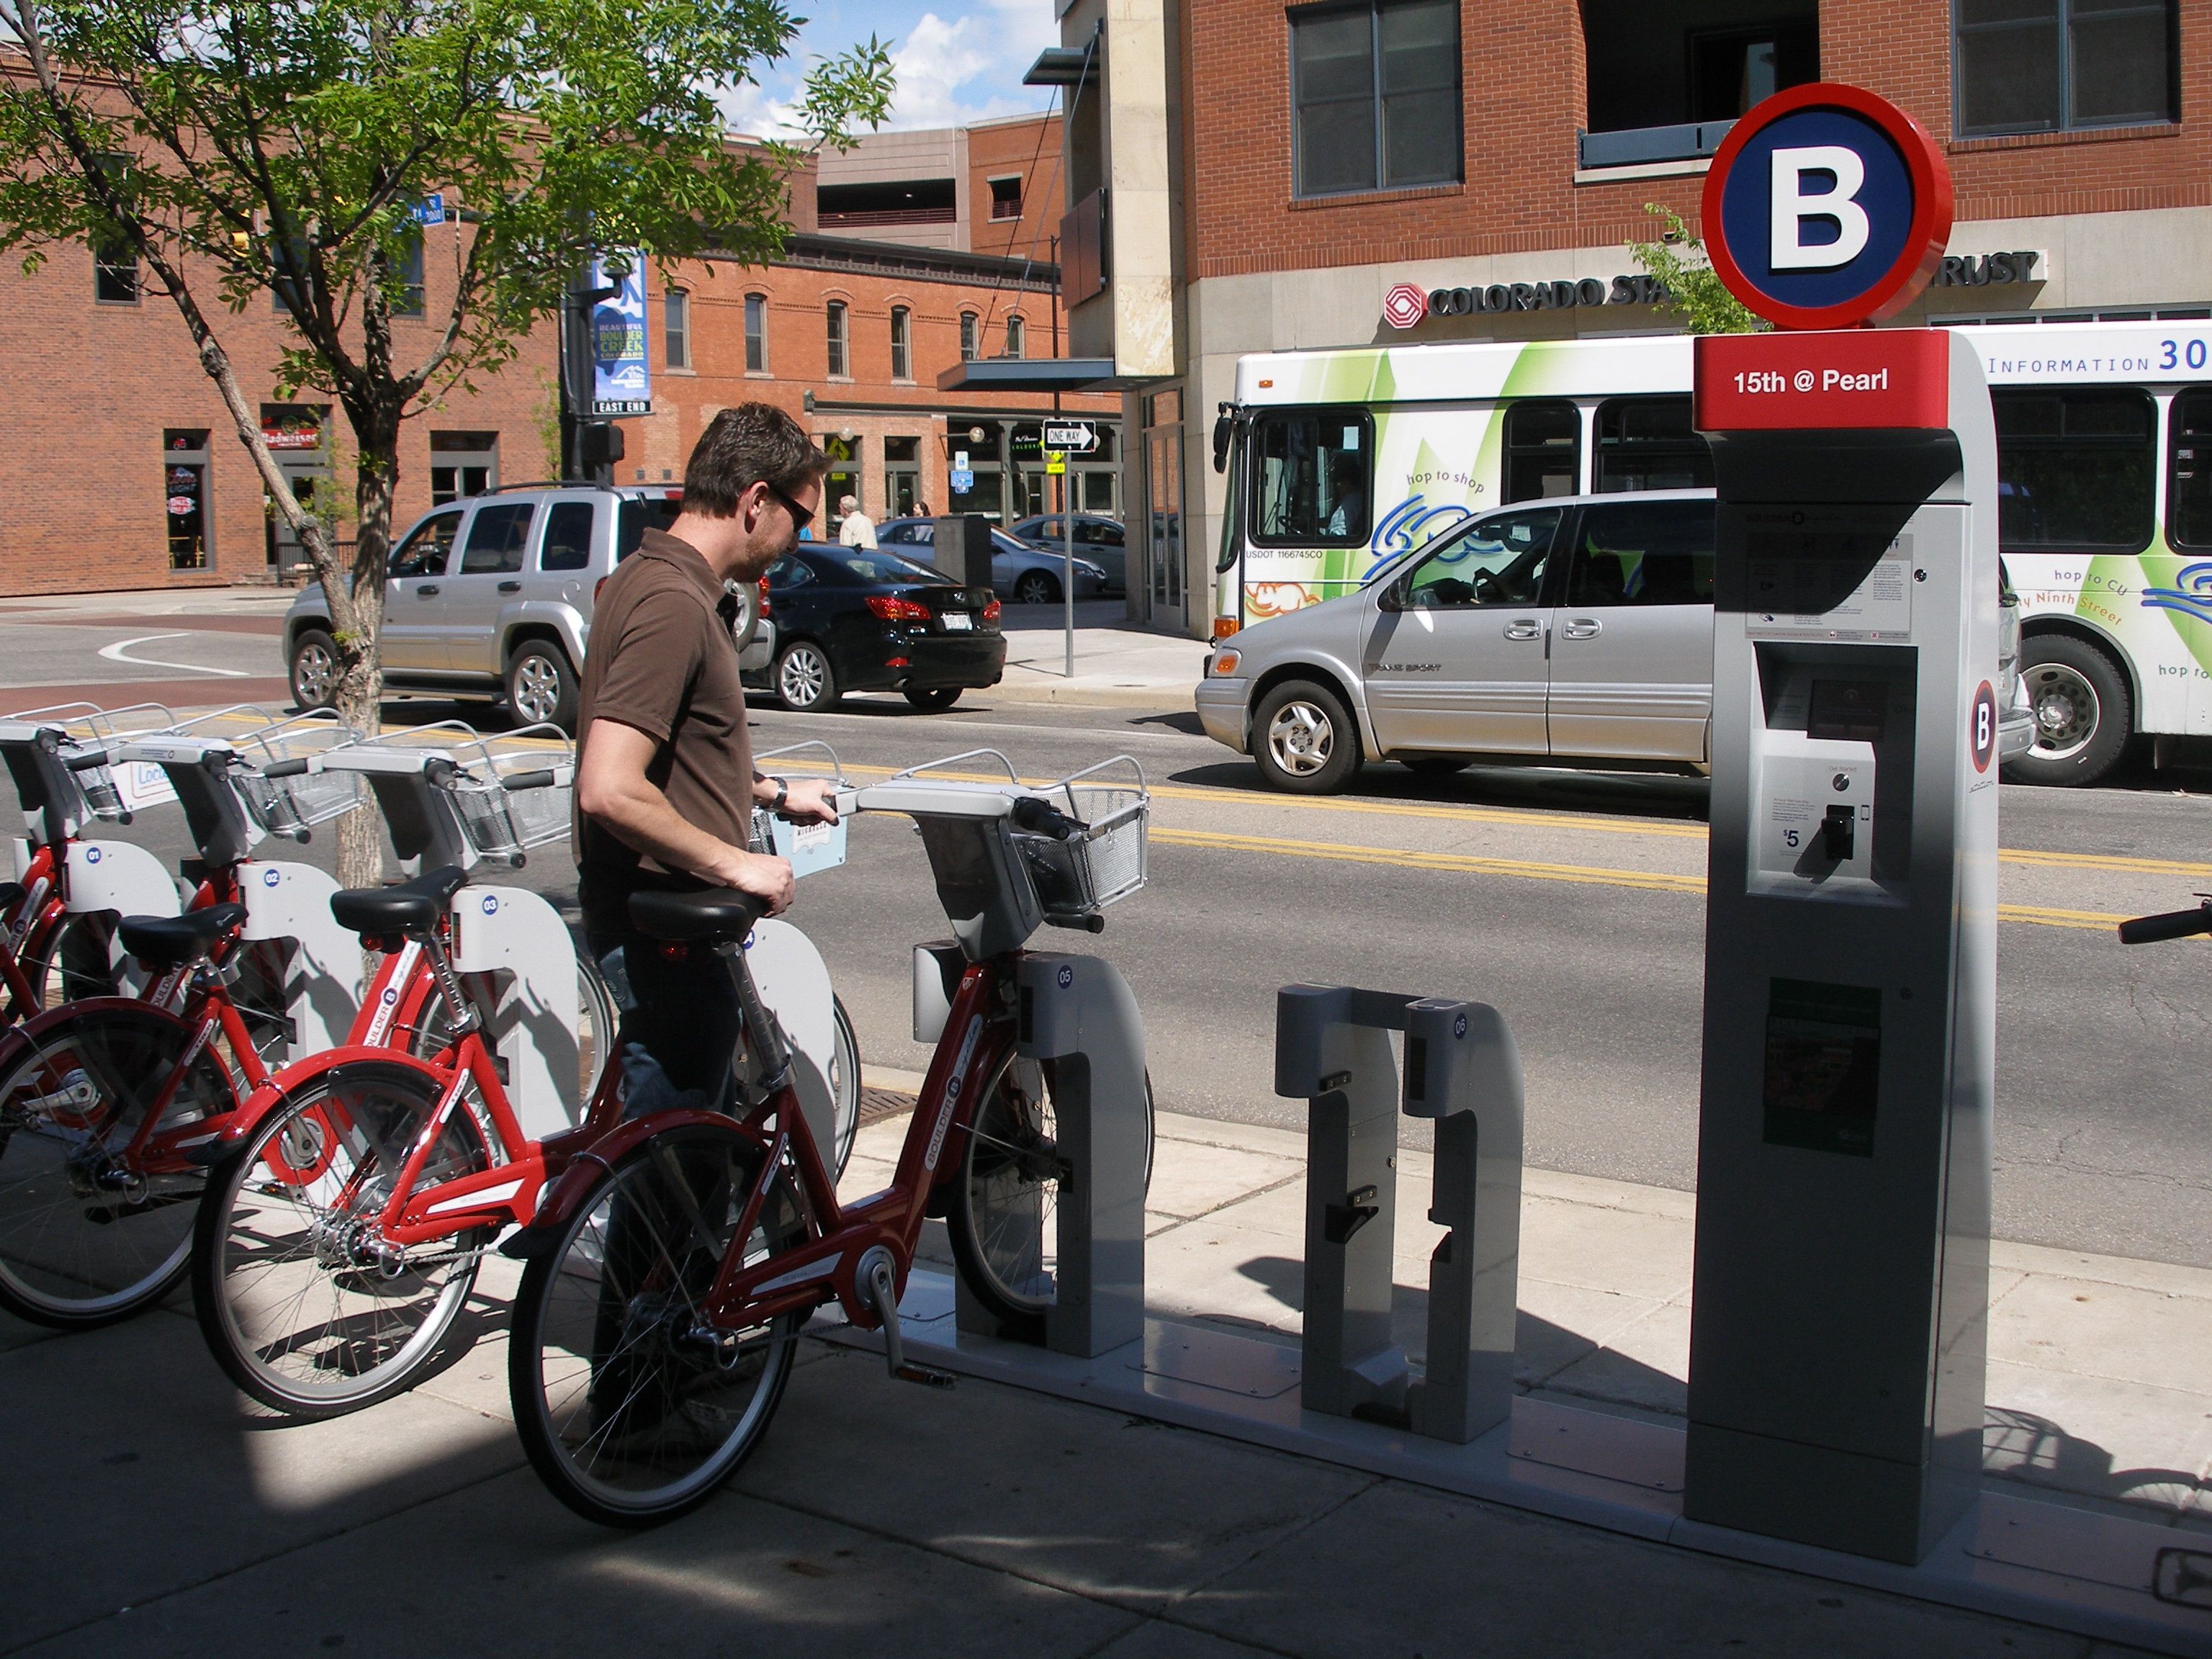 Please help us prioritize locations for ten new B-stations in 2013!